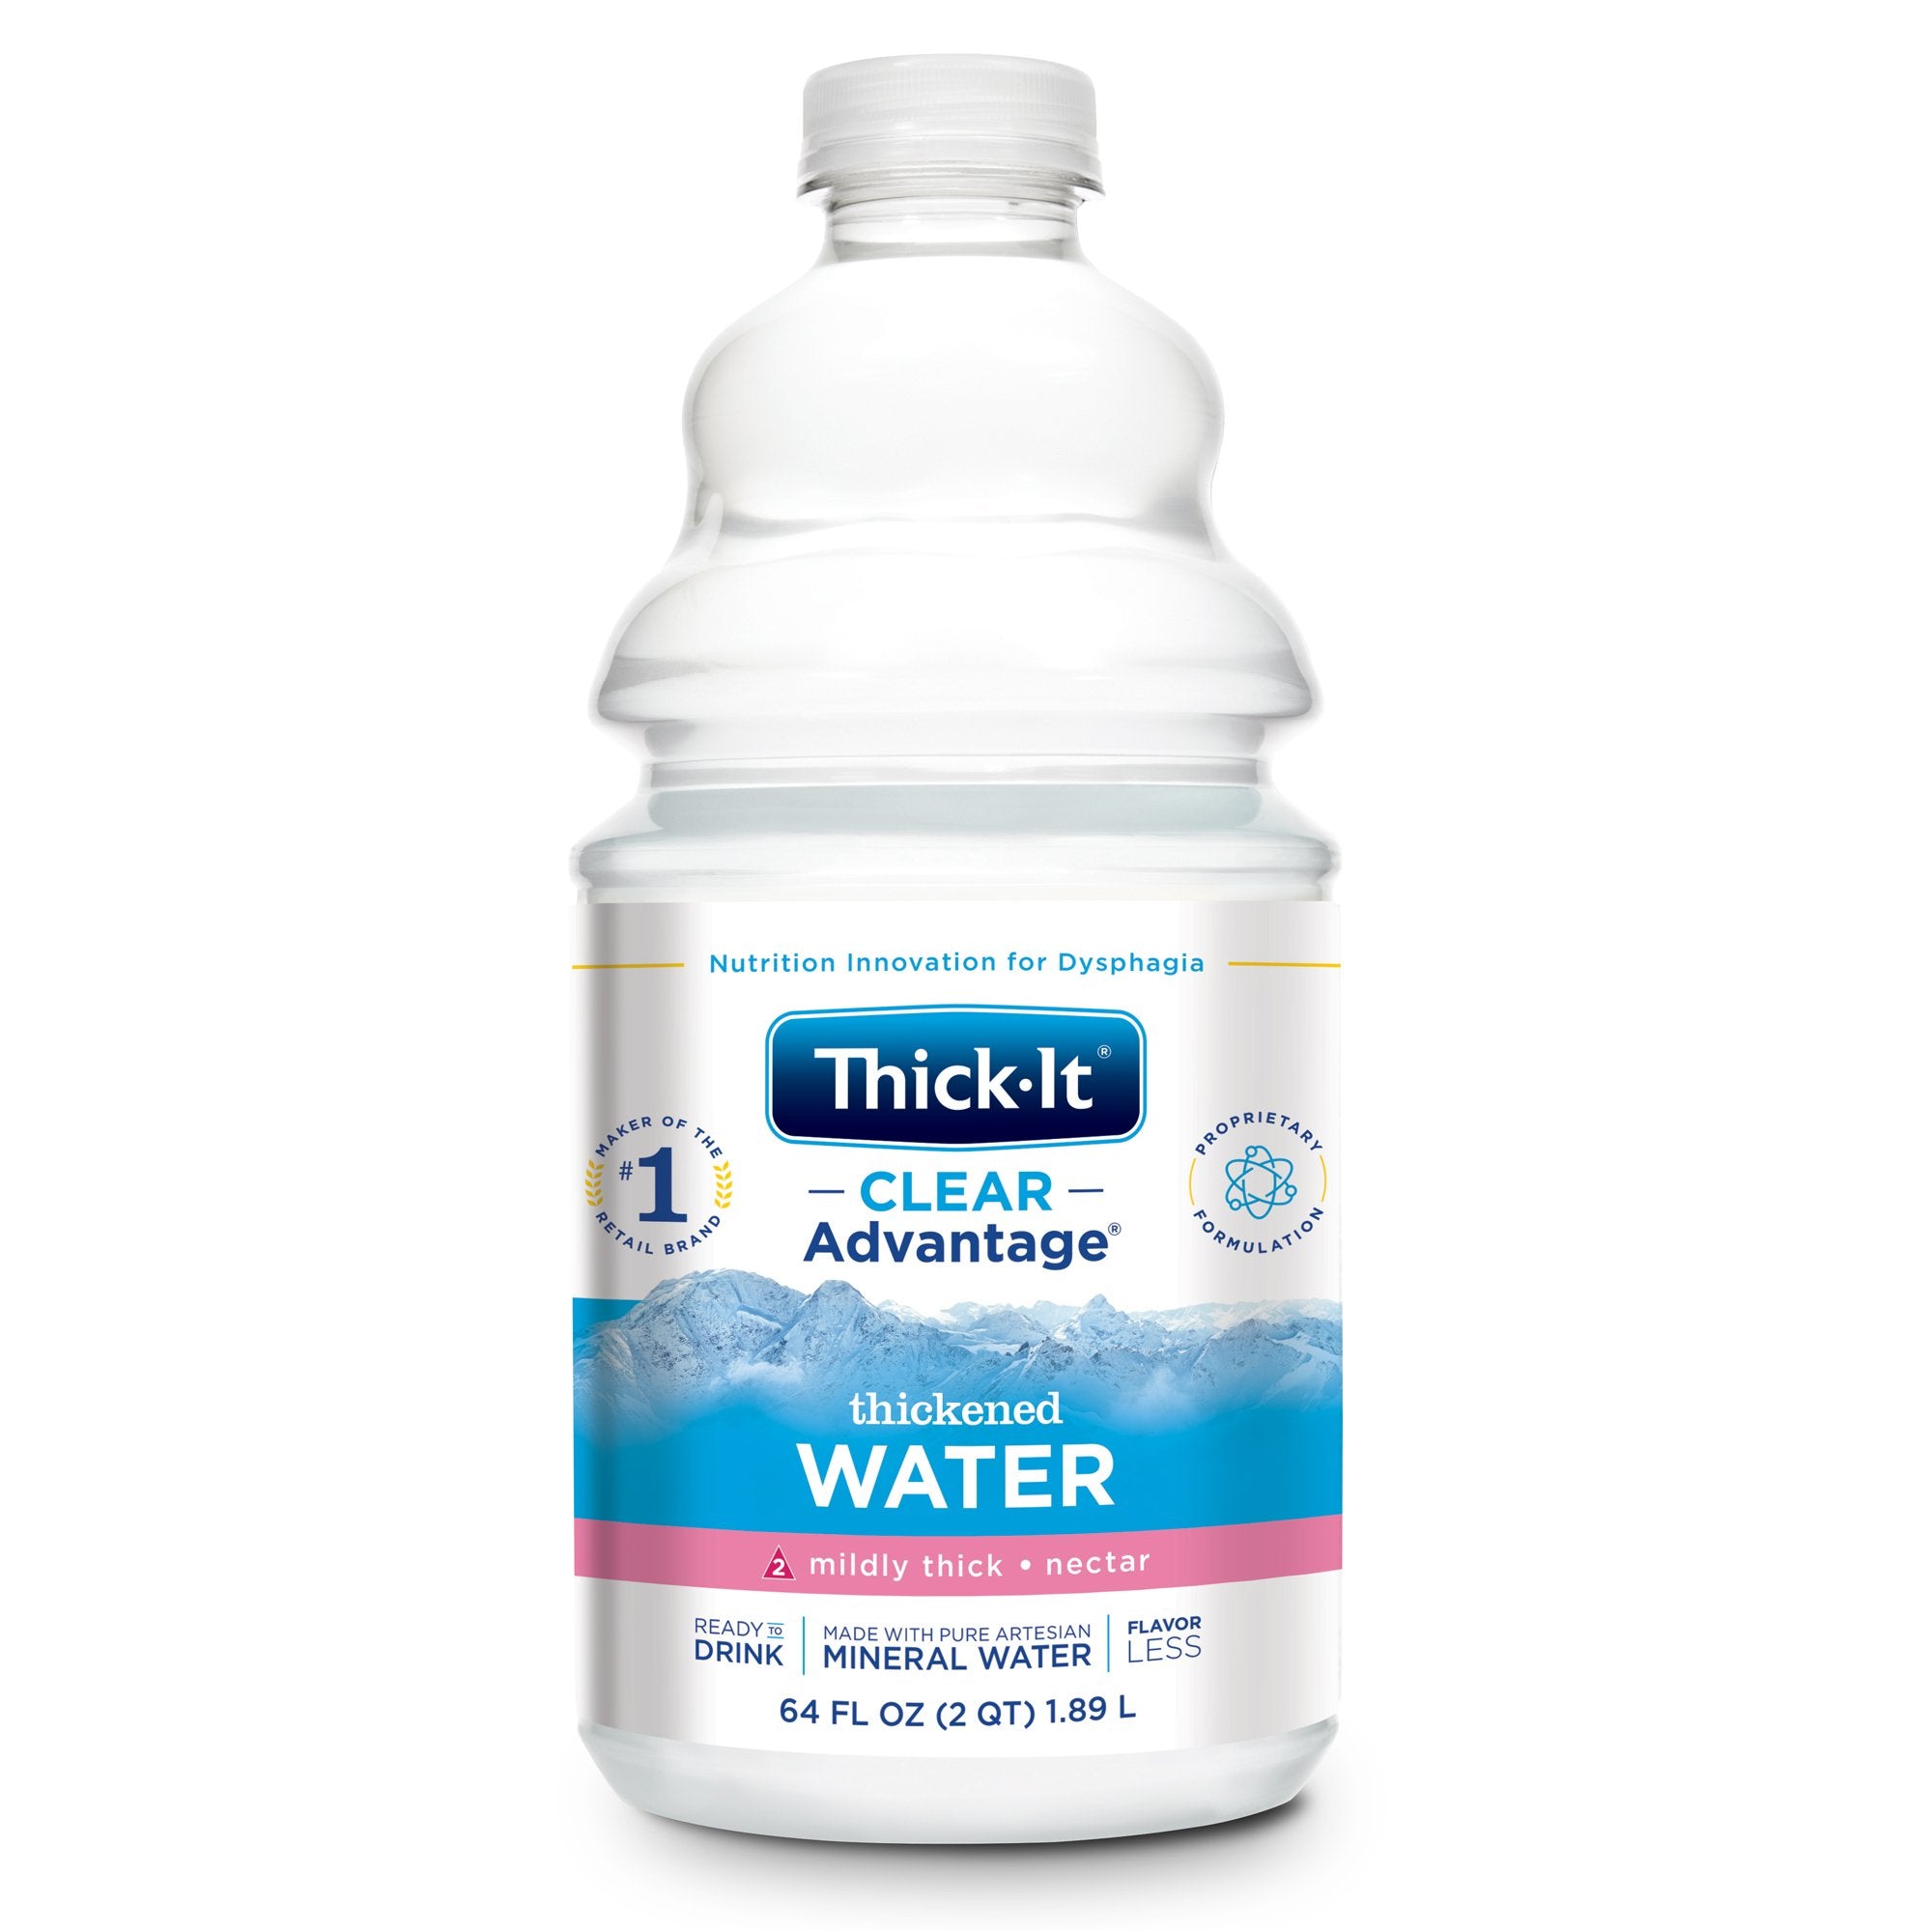 Thick-It Clear Advantage Nectar Consistency Thickened Water, Unflavored, 64 oz. Bottle -Case of 4